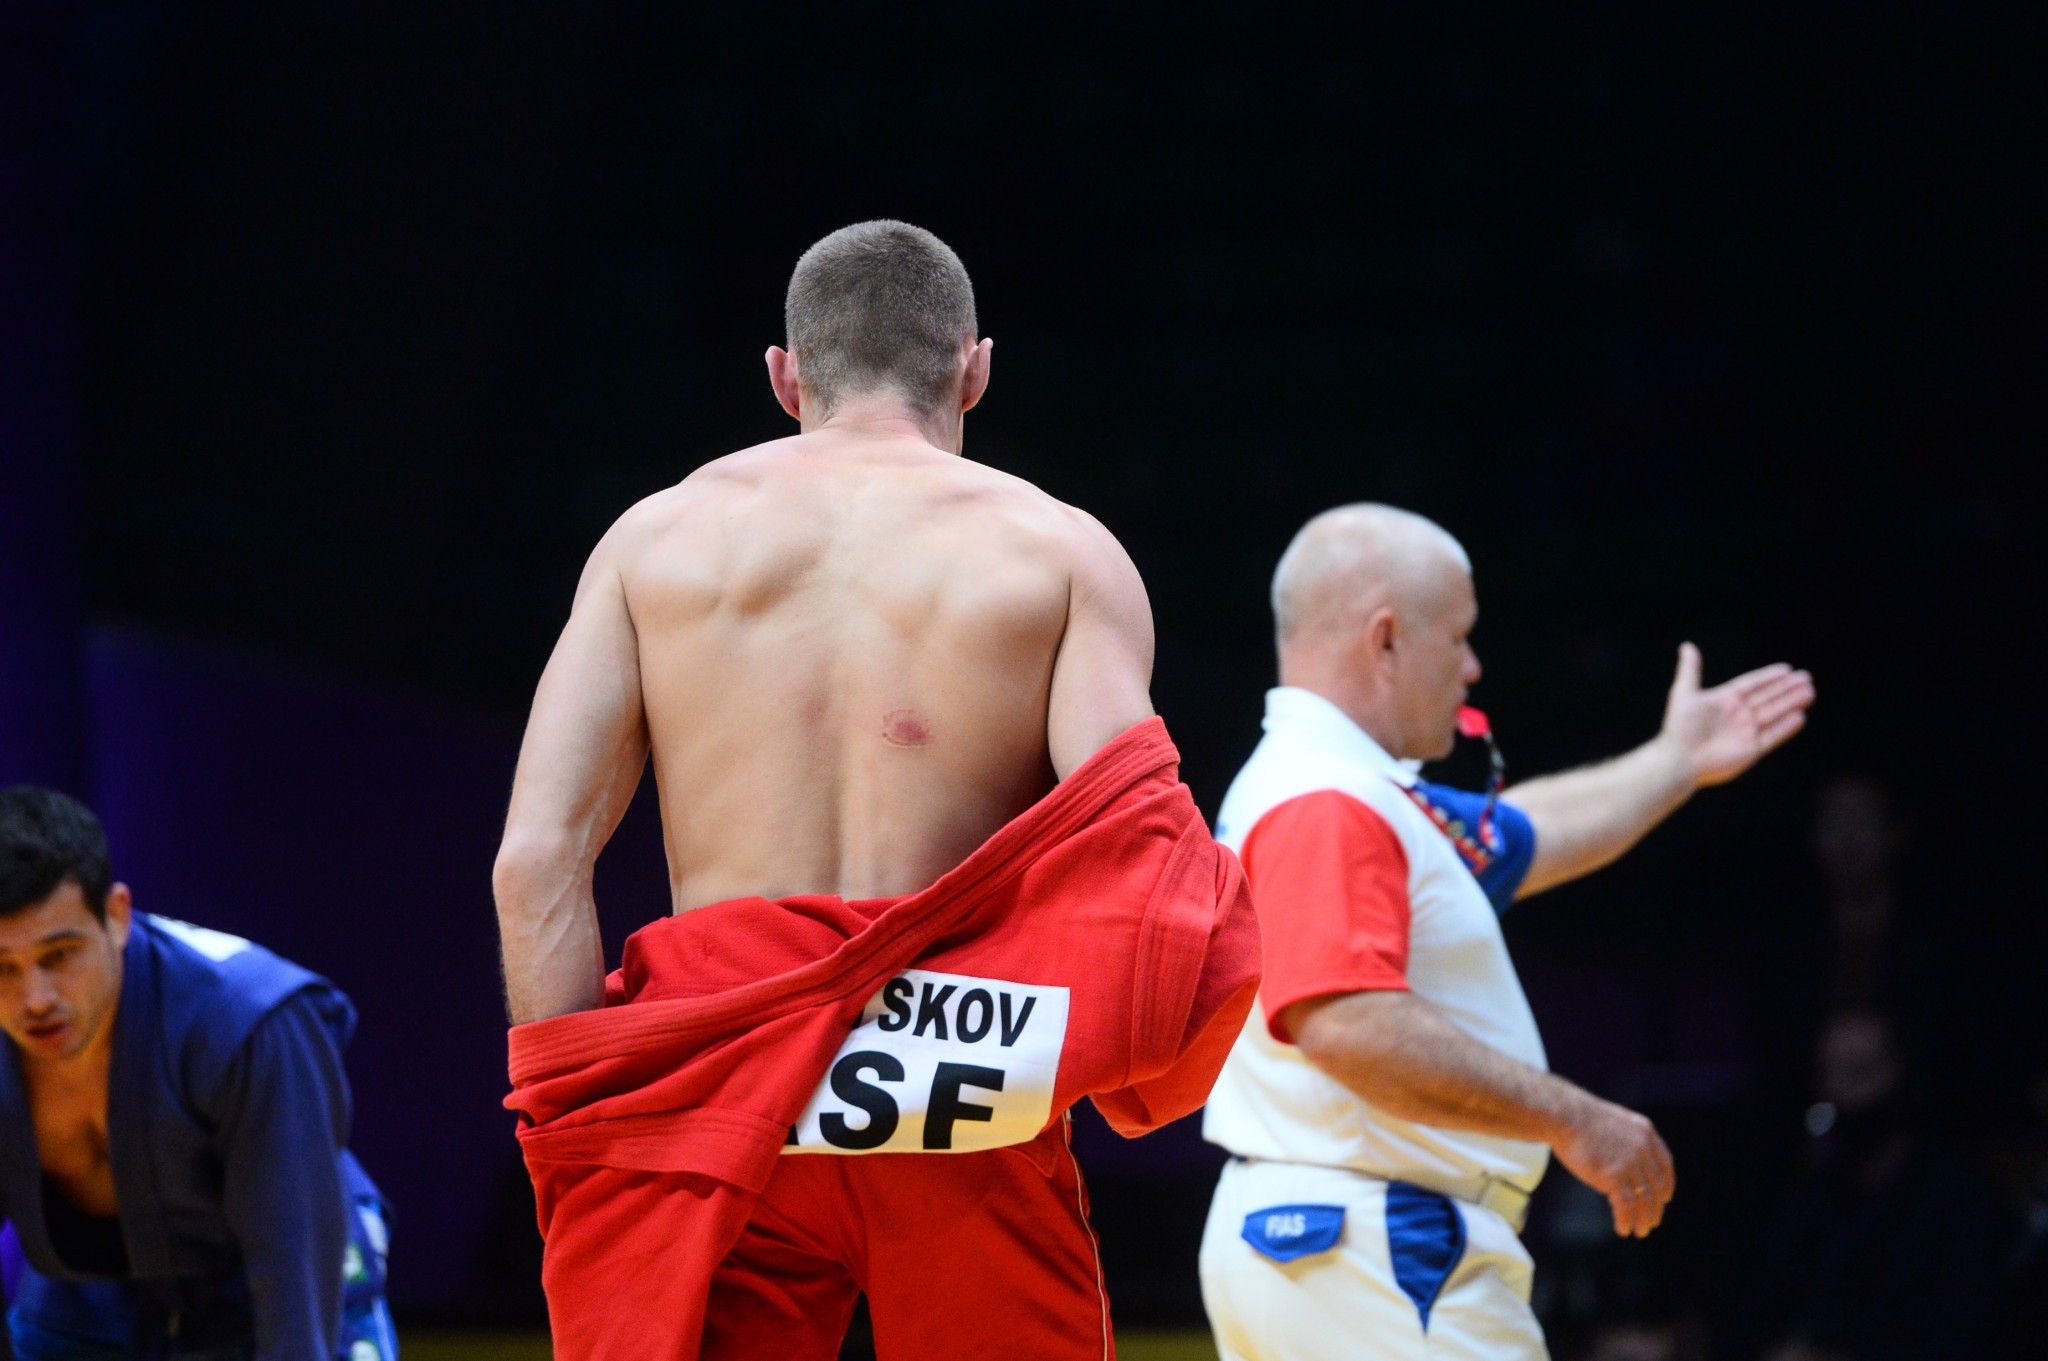 Spinning kicks and alleged bite on day two of World Sambo Championships 